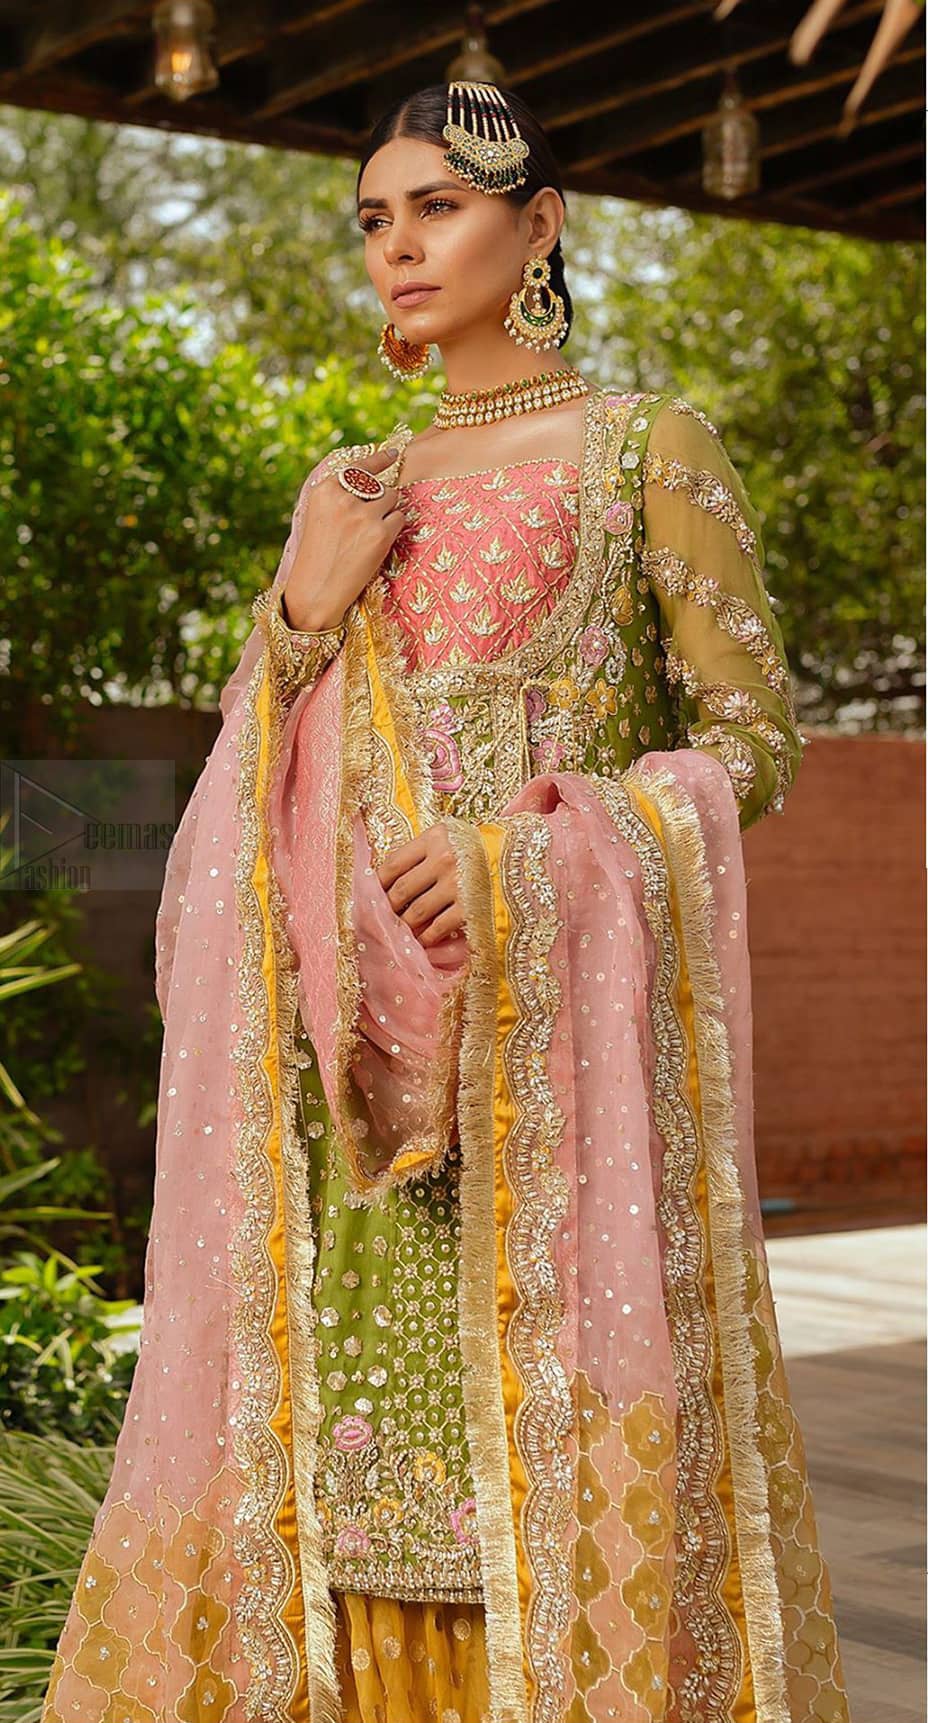 We have brought a charismatic charm to the traditional motifs and cuts. Our embroidery is rich in detailed traditional techniques executed to perfection. The bride shines bright in this outfit, embedded with sophisticated zardozi and thread embeishments. The bodice and hemline is furthermore emphasized with intricate details that gives the perfect ending to this mehndi dress. Pair it up with yellow sharara with captivating embellished border. The dupatta incorporates beautifully designed borders with zardozi, applique and kiran along the length, focusing on the geometrically embellished pallu and sequins spray all over to give it a perfect look.